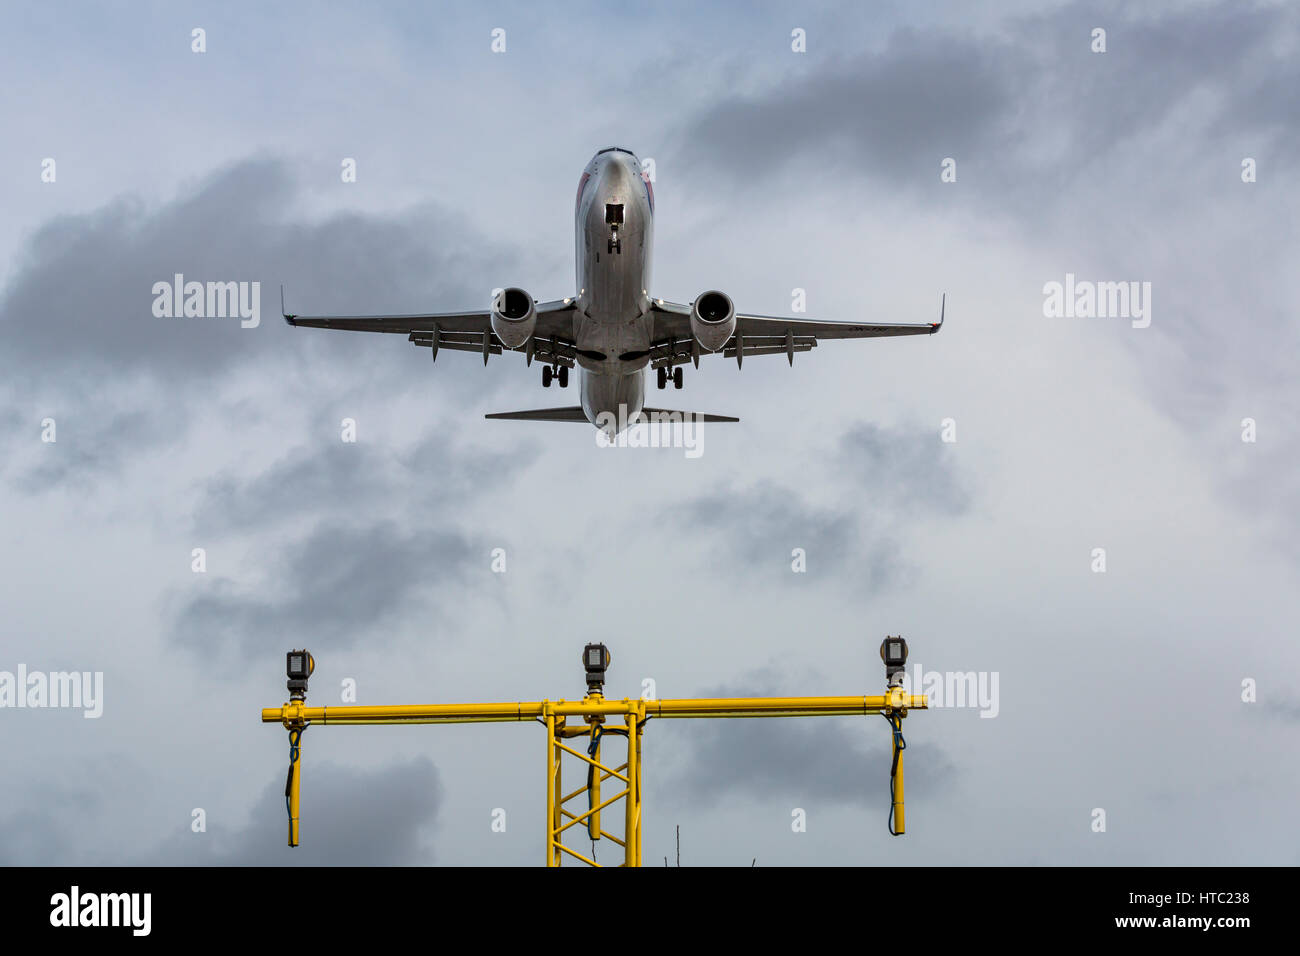 Airlines facing jet fuel price hikes and long delays due to staff covid shortages, aircraft landing at a London Gatwick airport, England UK Stock Photo